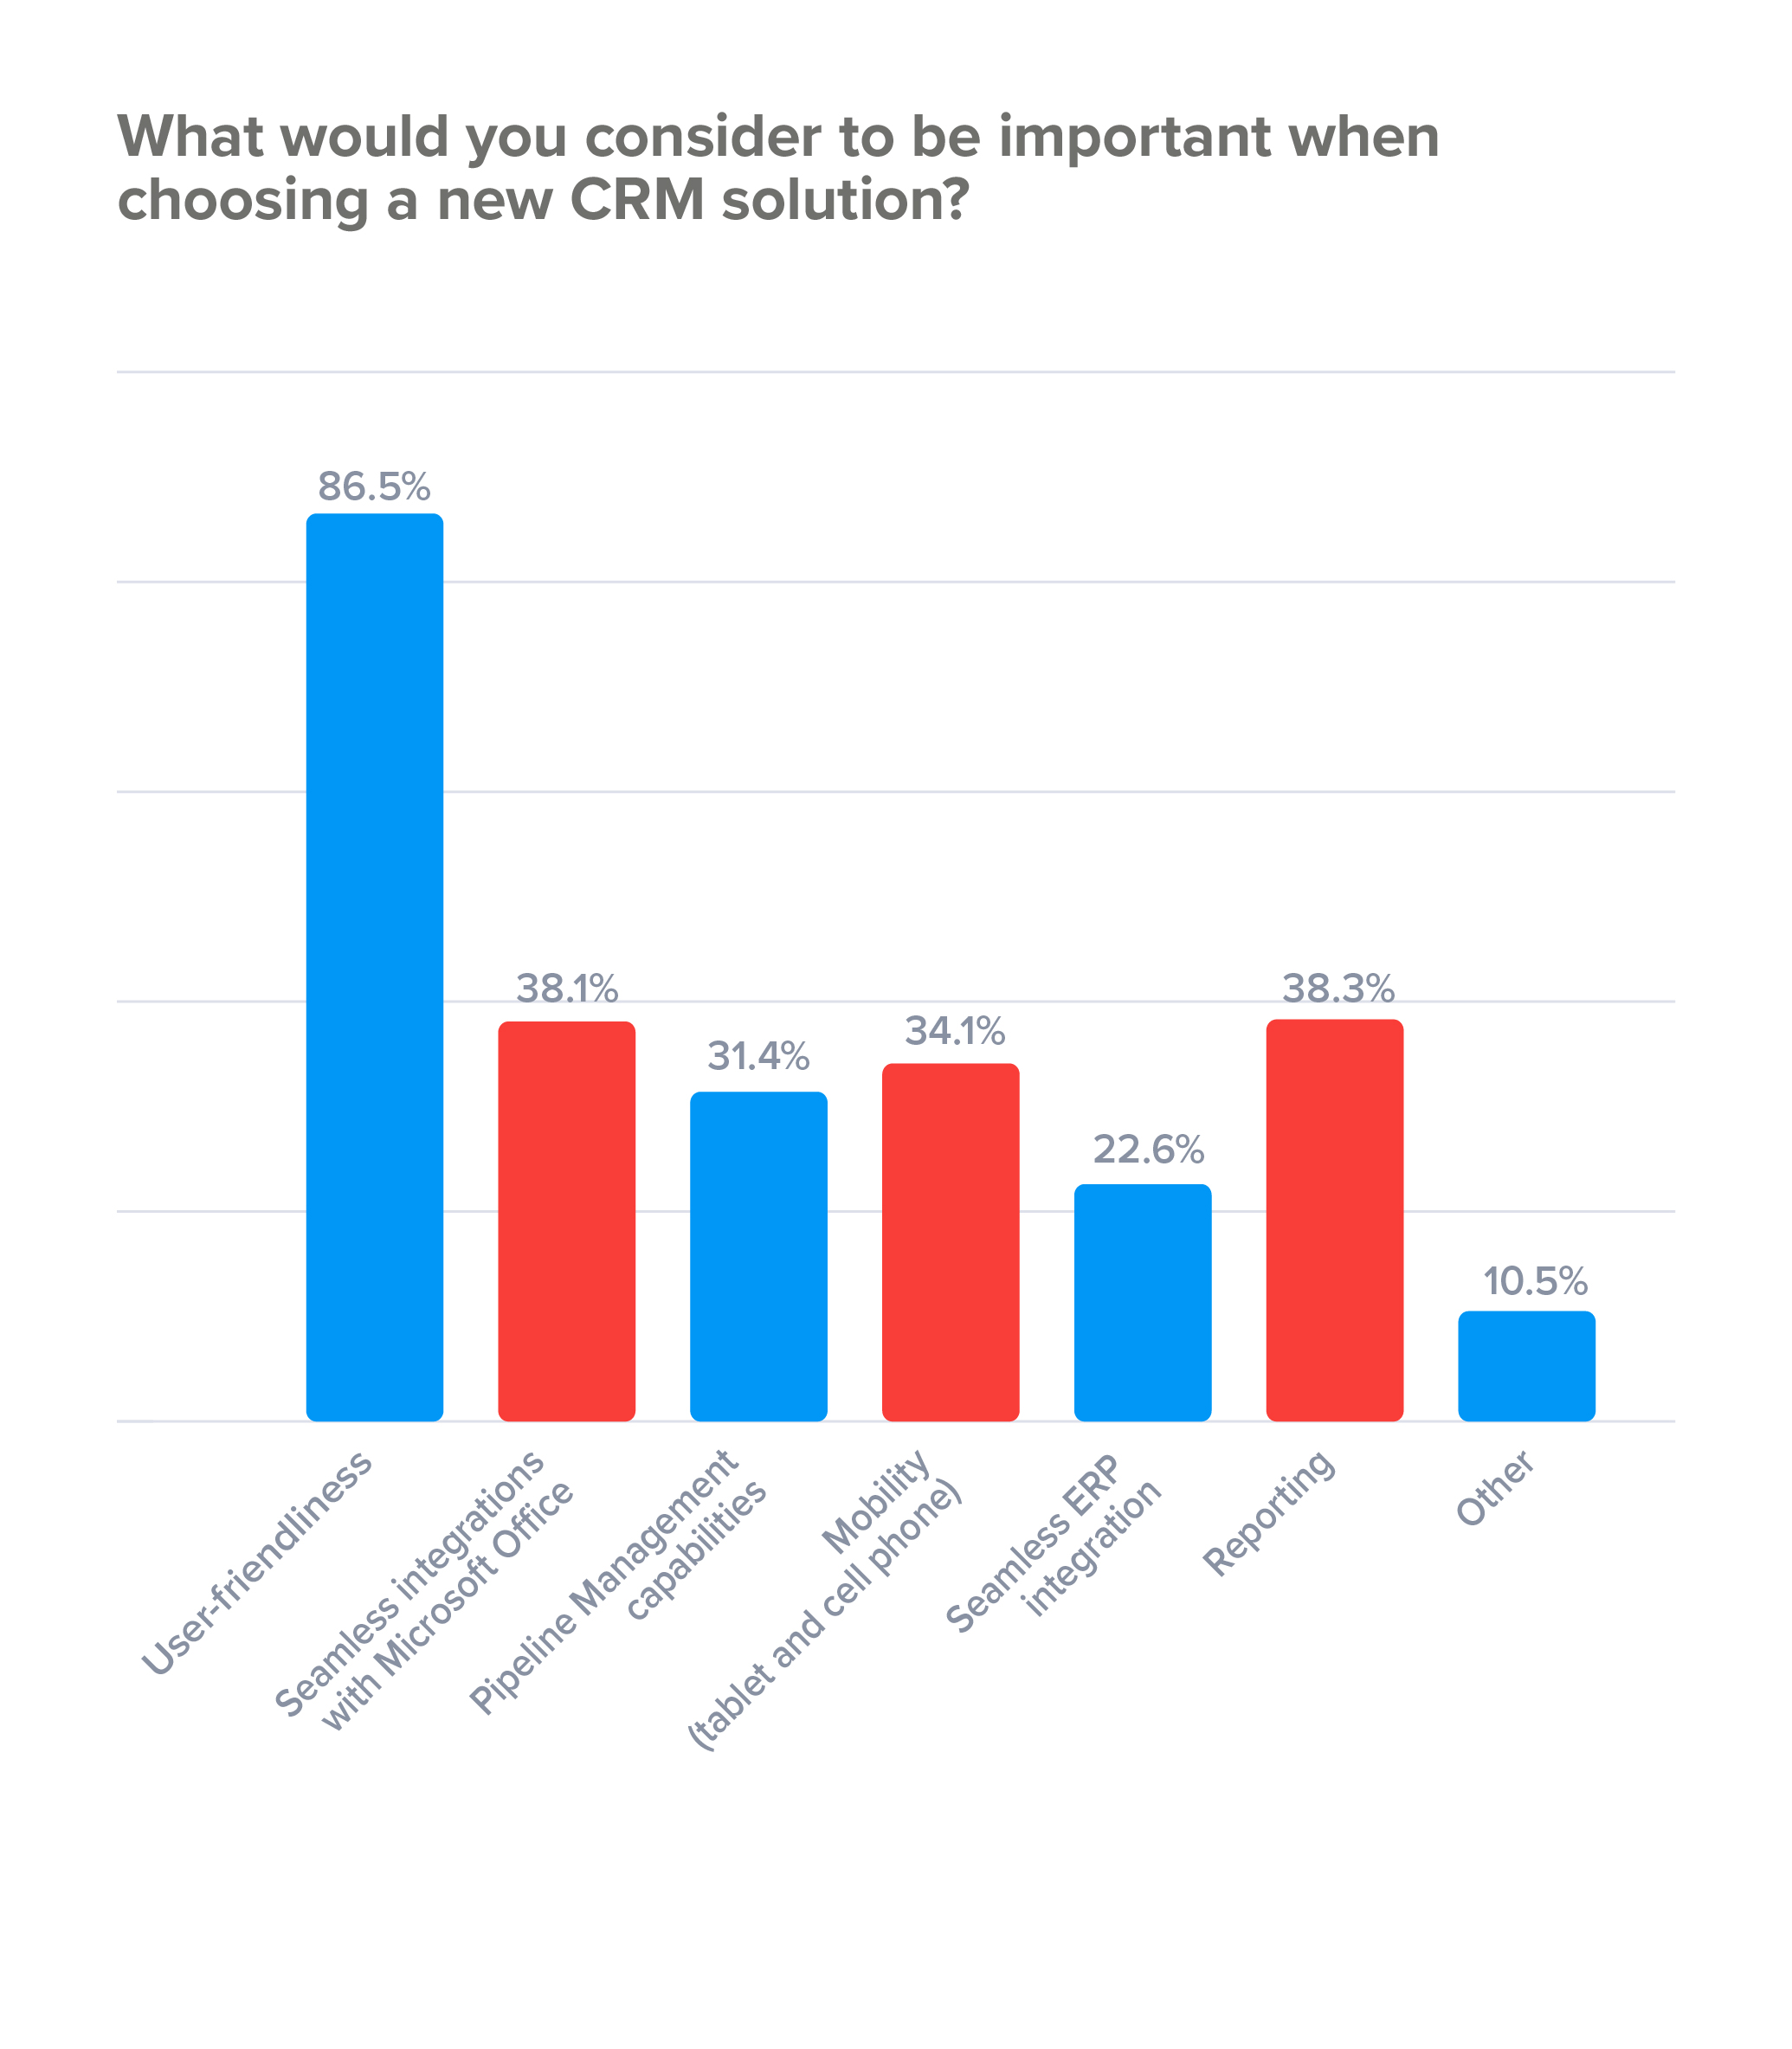 Important factors in choosing a new CRM solution